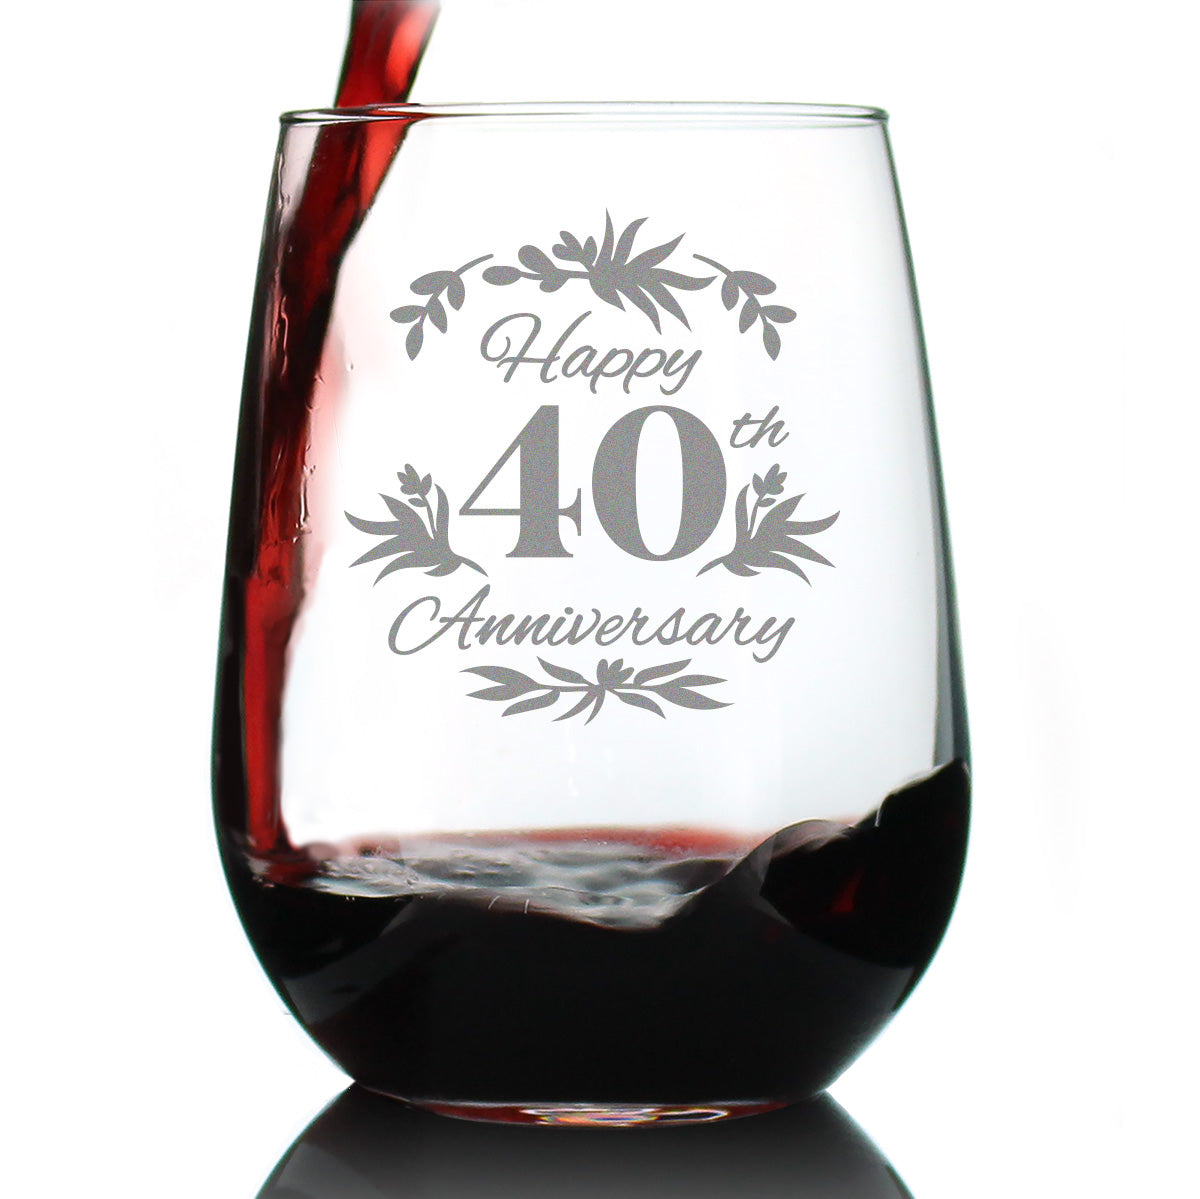 Happy 40th Anniversary - Stemless Wine Glass Gifts for Women & Men - 40 Year Anniversary Party Decor - Large Glasses